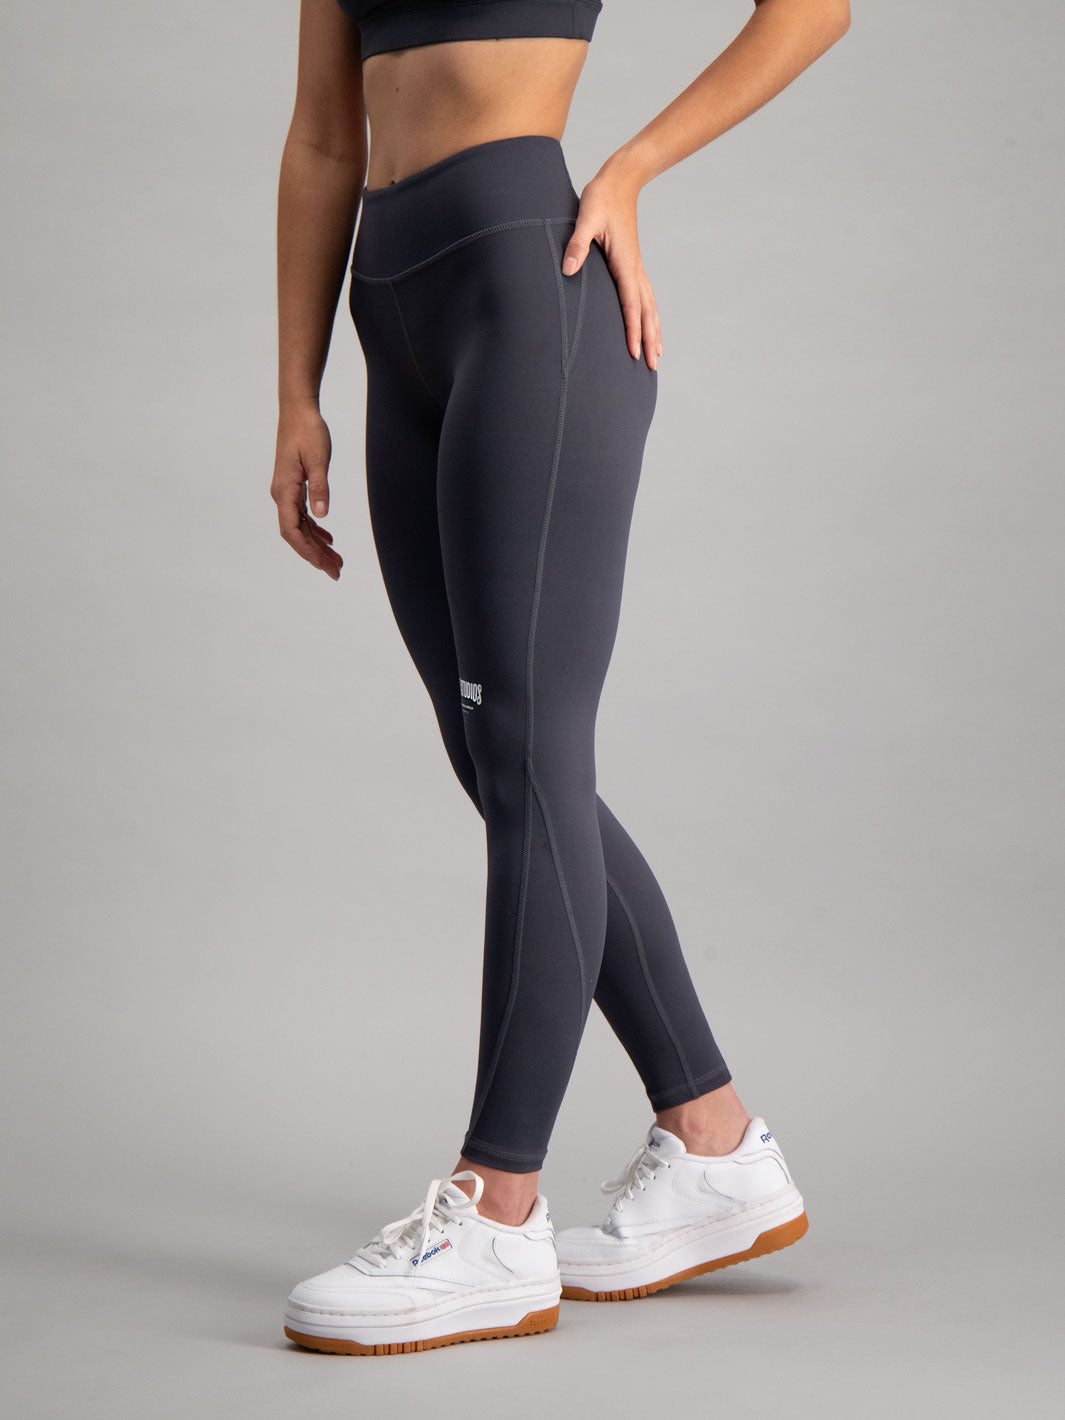 Core Tights - Charcoal